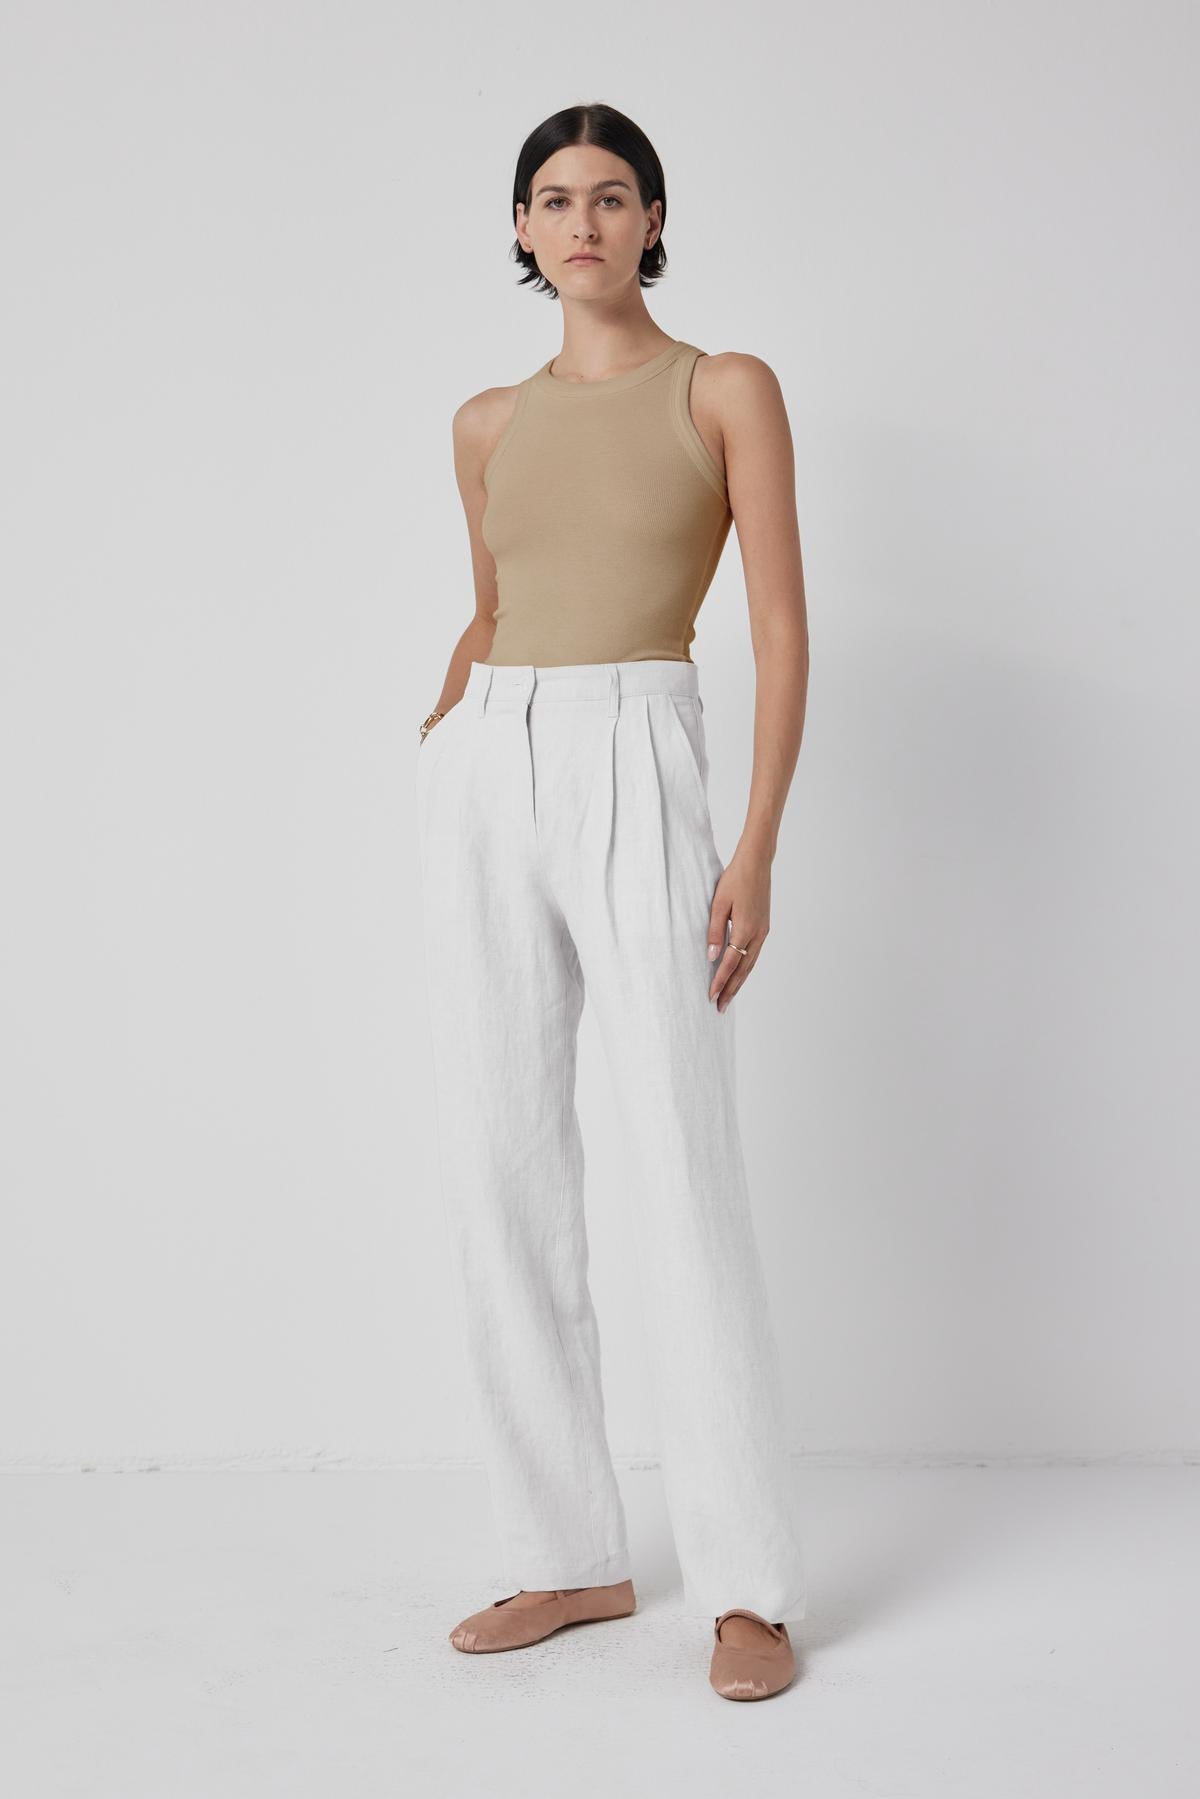 A woman standing against a white background wearing a sleeveless Cruz Tank Top, white trousers, and chic beige flat shoes by Velvet by Jenny Graham.-36463435219137